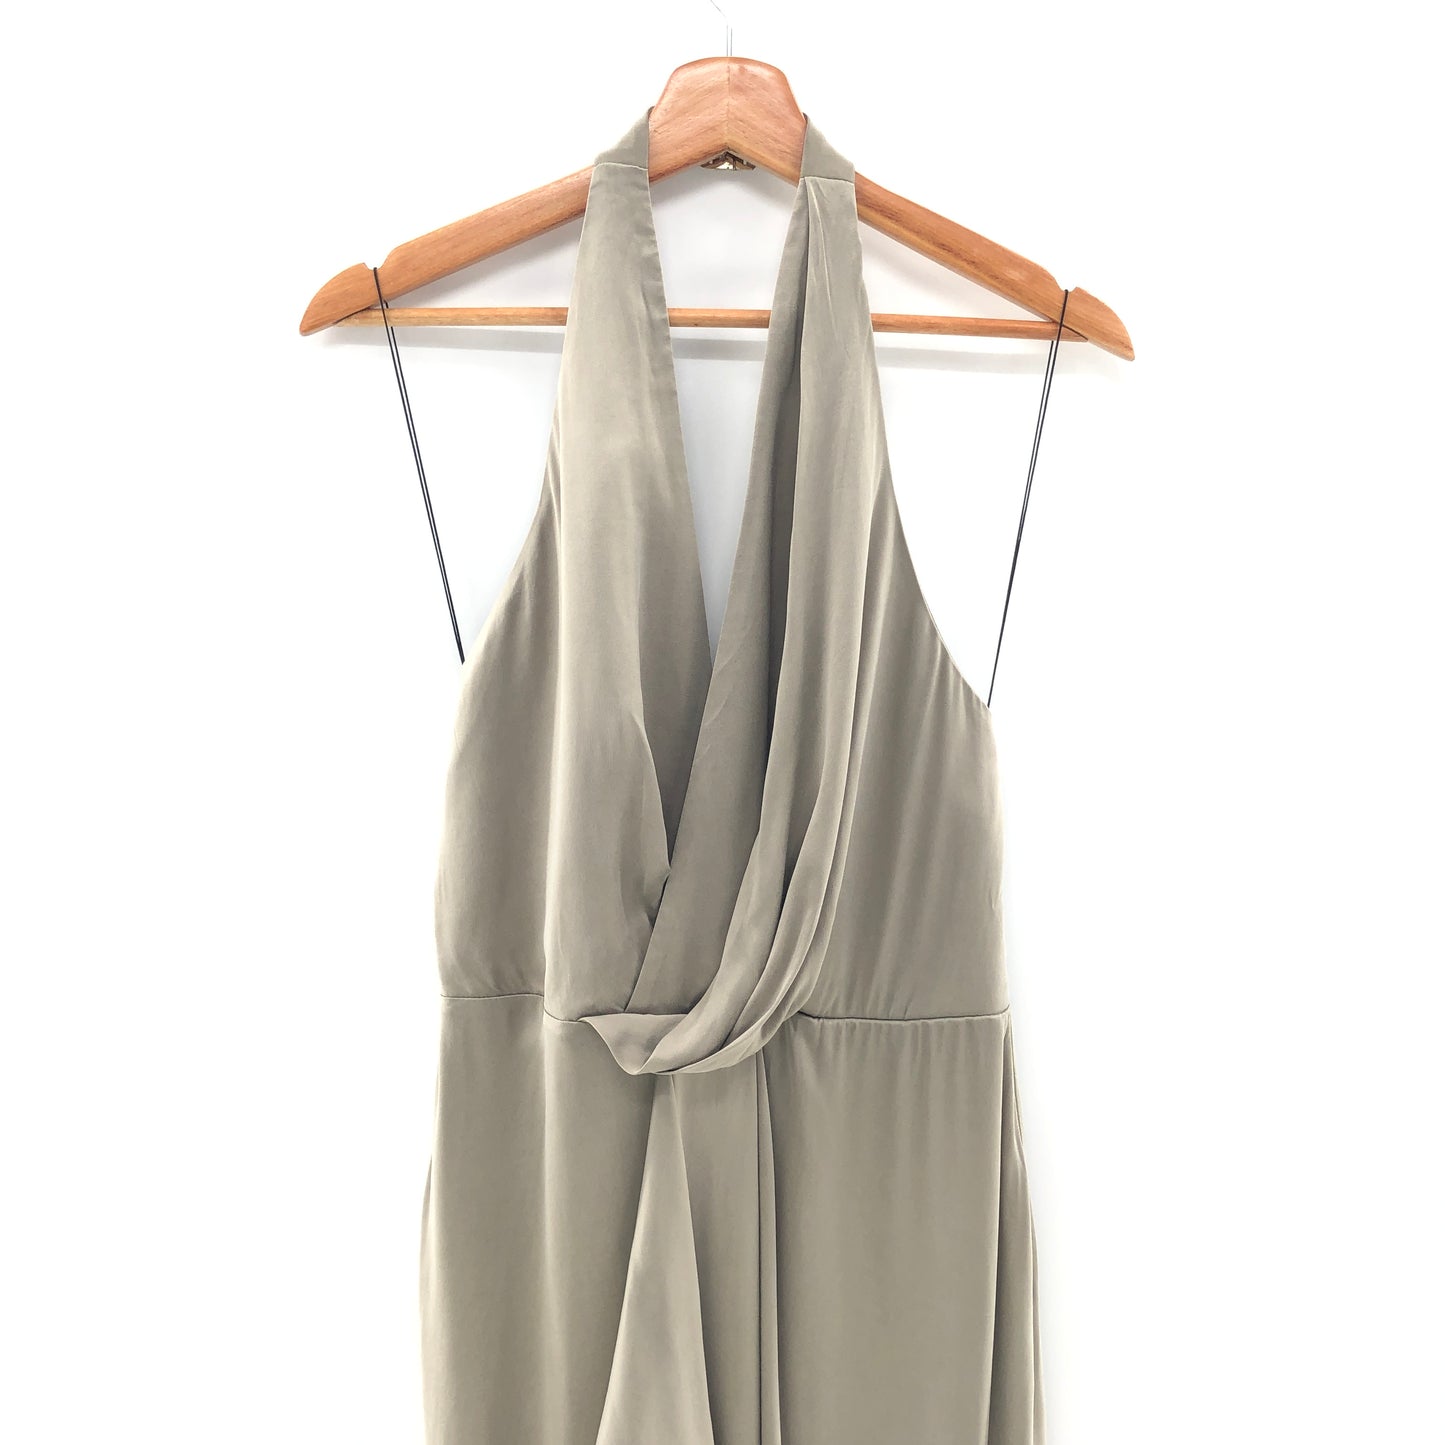 Significant Other Elaine Dress in Taupe